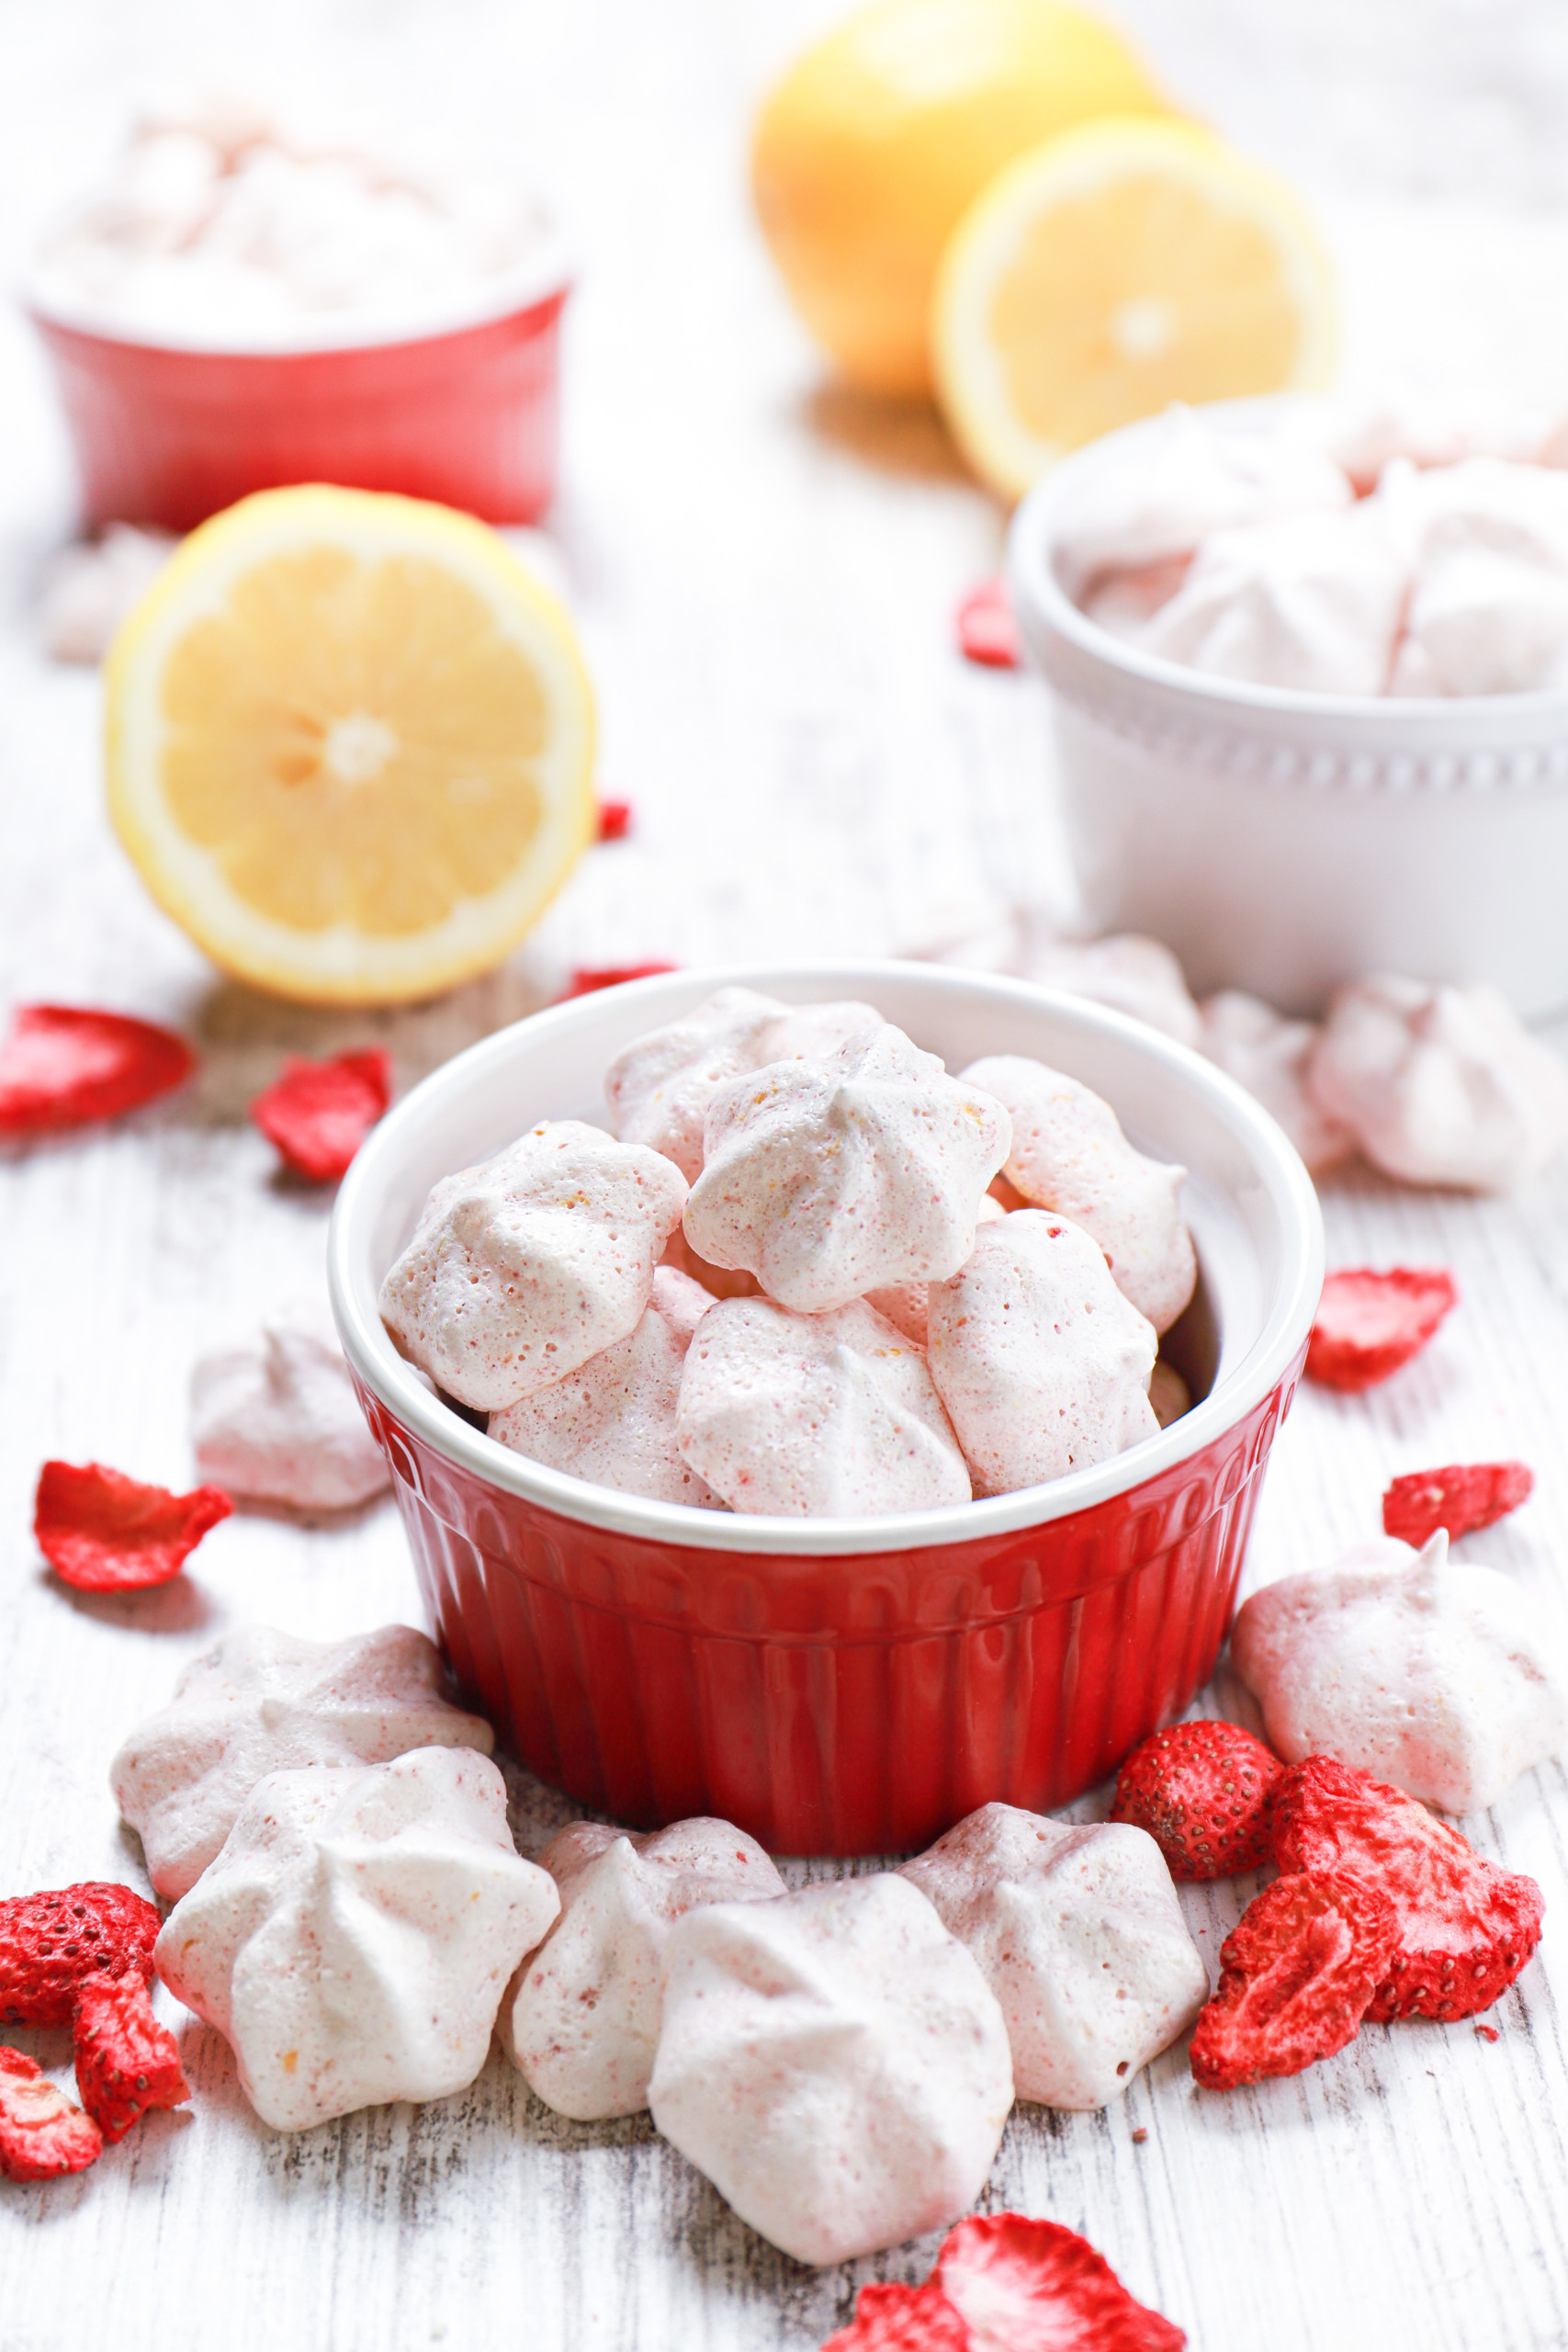 Mini strawberry lemon meringue cookies in small bowls with lemon halves, more meringues, and freeze-dried strawberries surrounding the bowls.